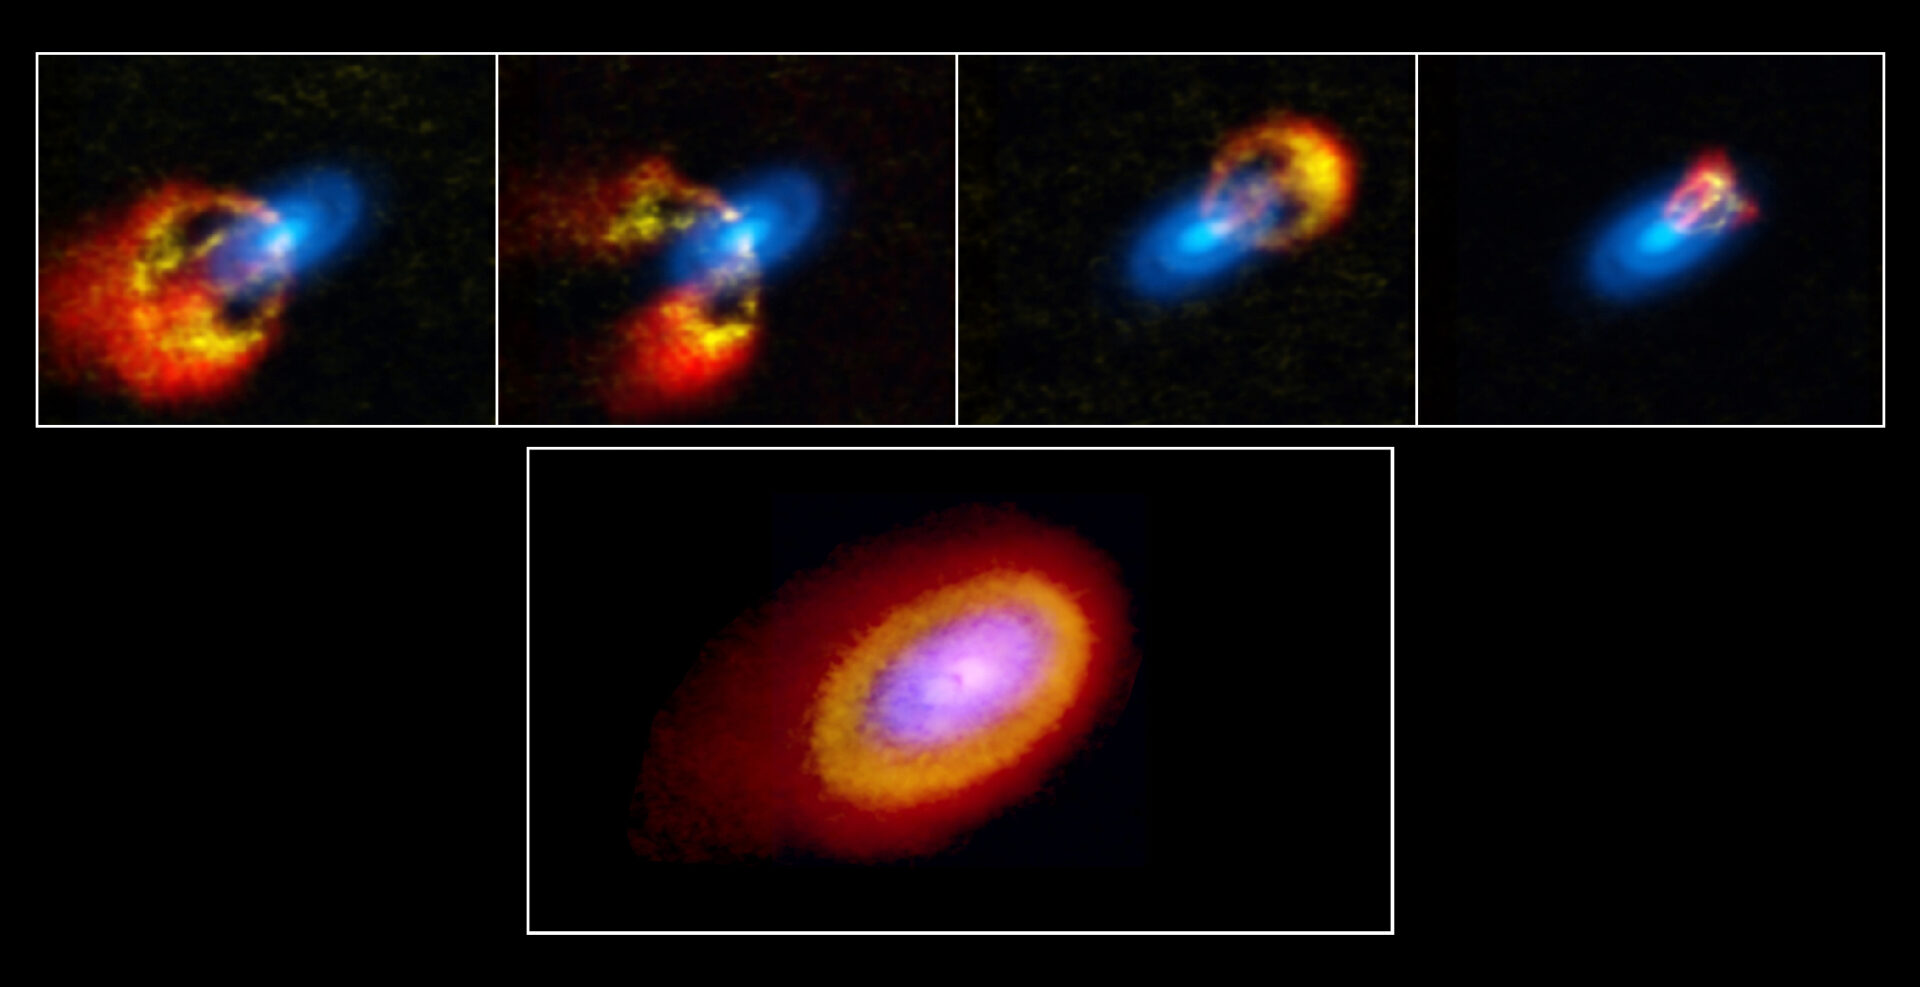 Using gas velocity data, scientists observing Elias 2-27 were able to directly measure the mass of the young star’s protoplanetary disk and also trace dynamical perturbations in the star system. Visible in this paneled composite are the dust continuum 0.87mm emission data (blue), along with emissions from gases C18O (yellow) and 13CO (red). Credit: Teresa Paneque-Carreño/ Bill Saxton, NRAO/AUI/NSF